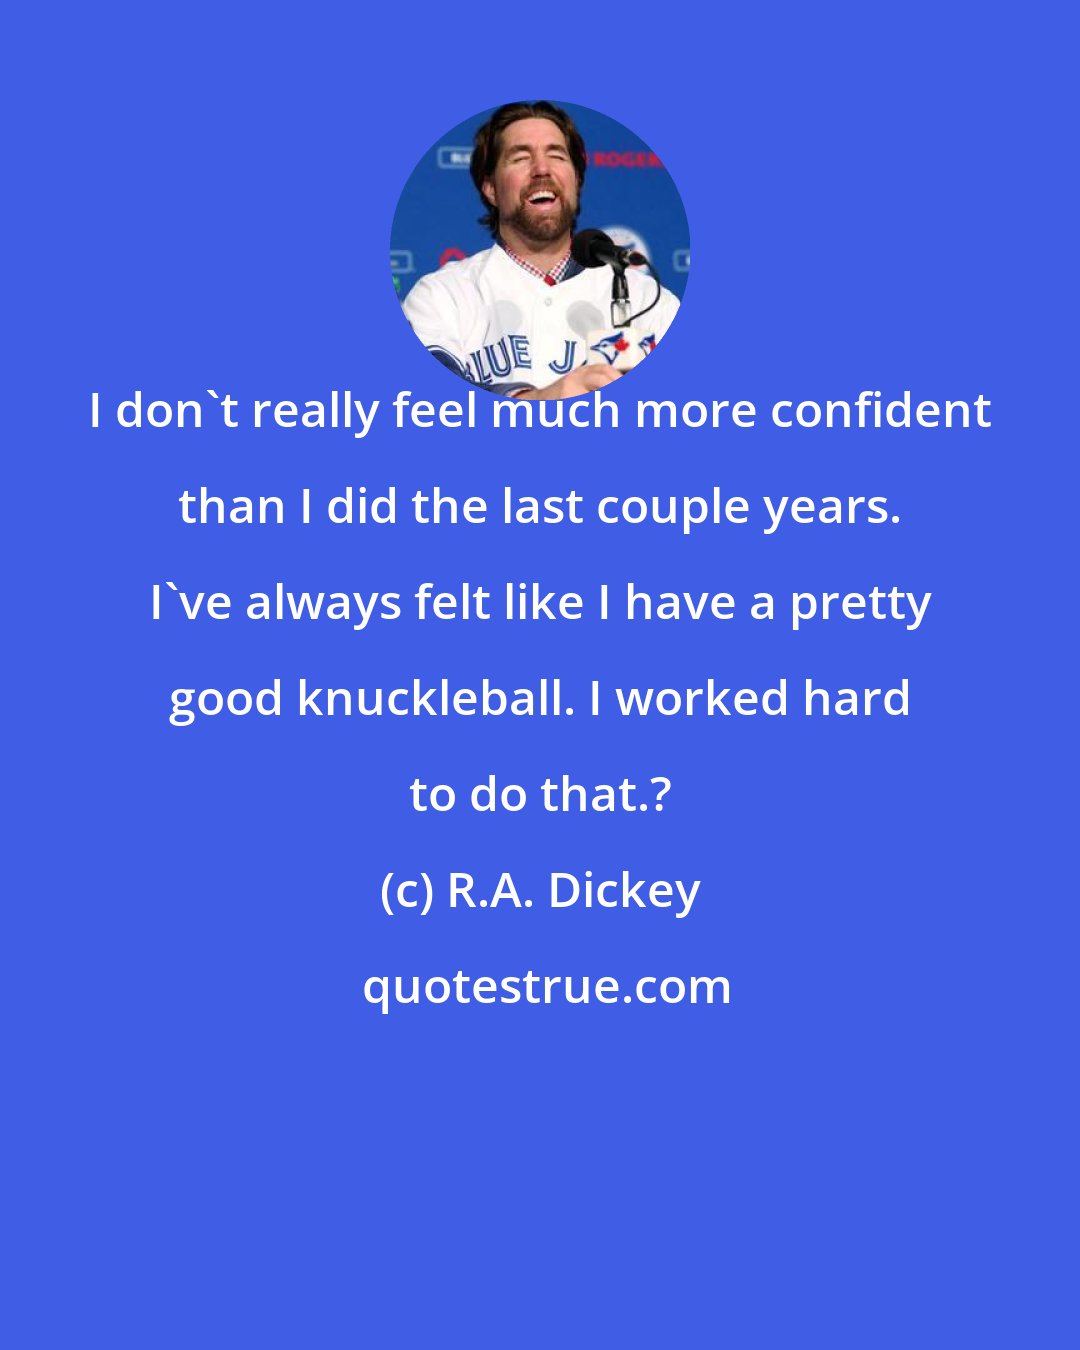 R.A. Dickey: I don't really feel much more confident than I did the last couple years. I've always felt like I have a pretty good knuckleball. I worked hard to do that.?